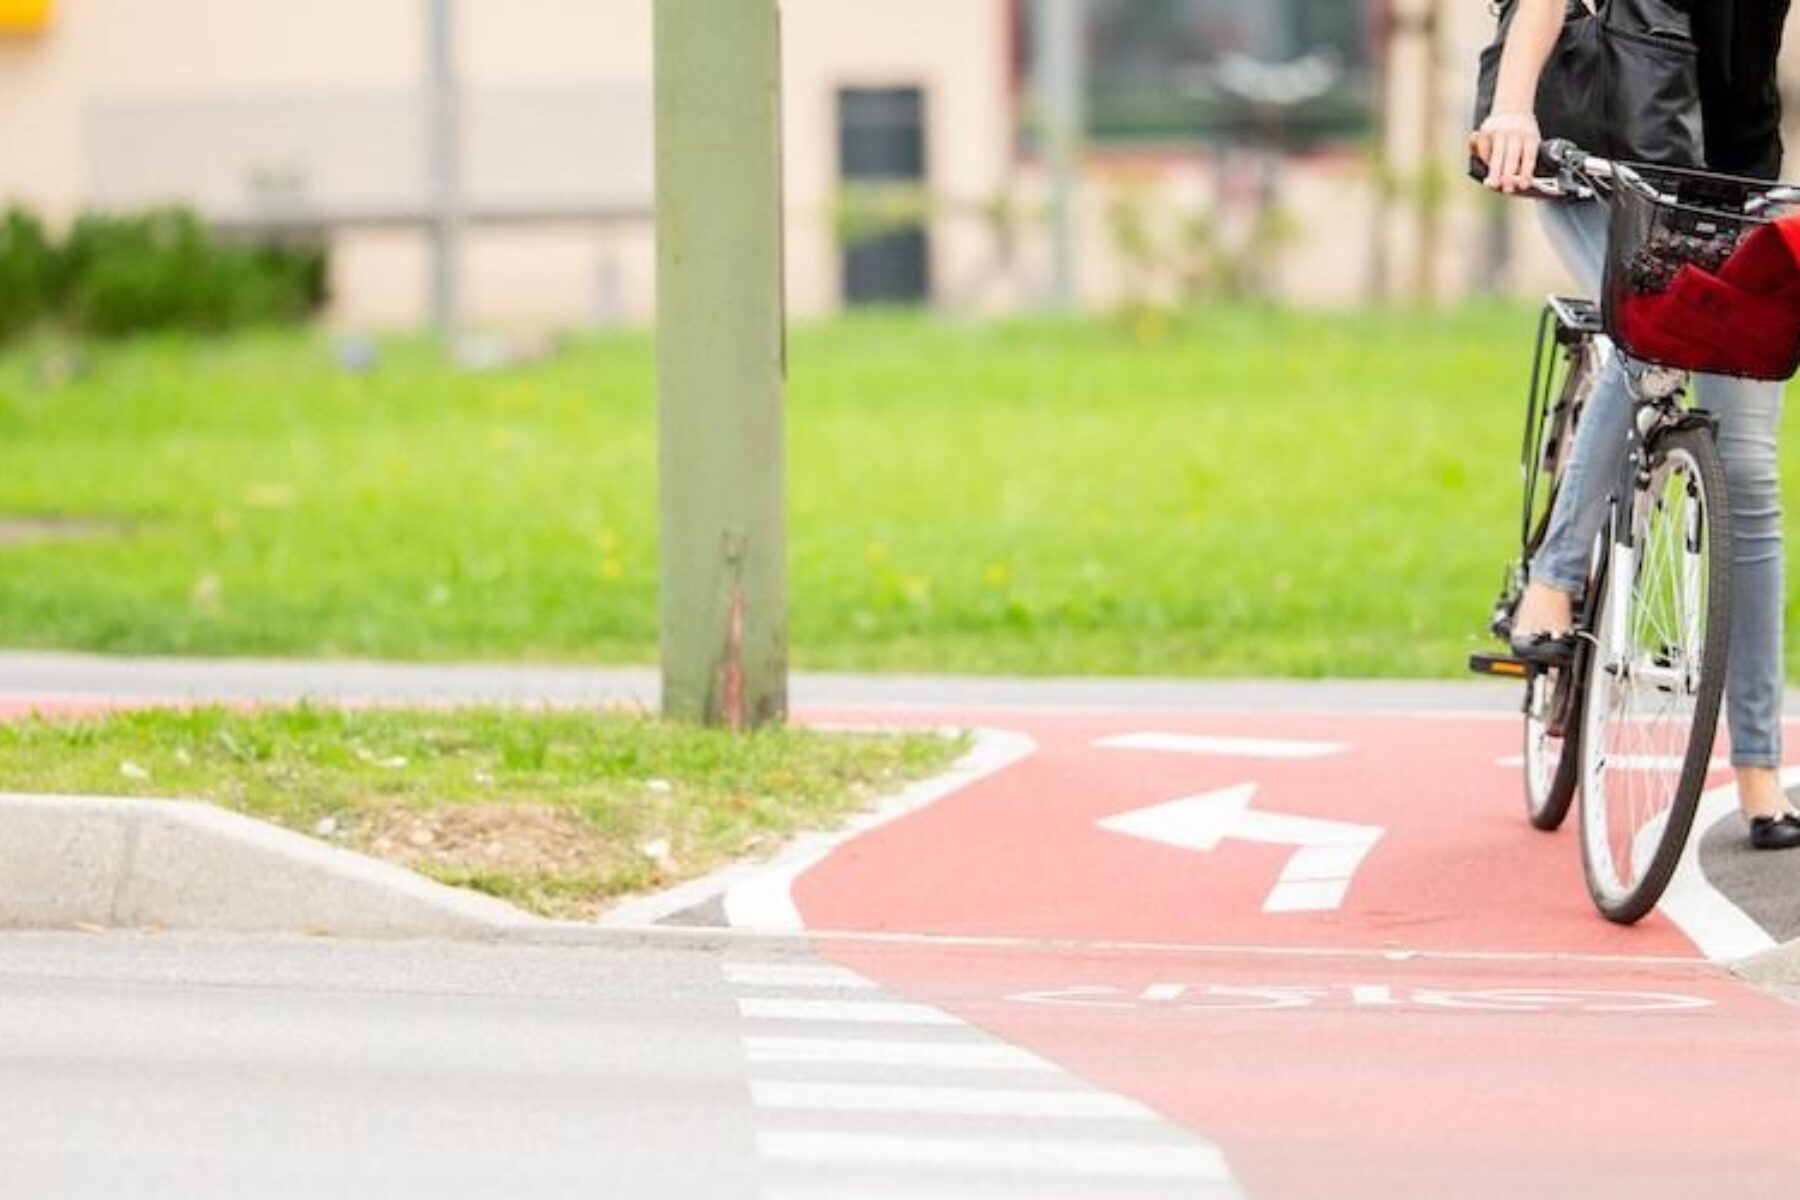 Young Woman on Bicycle Waiting at crosswalk - Photo courtesy Getty Images